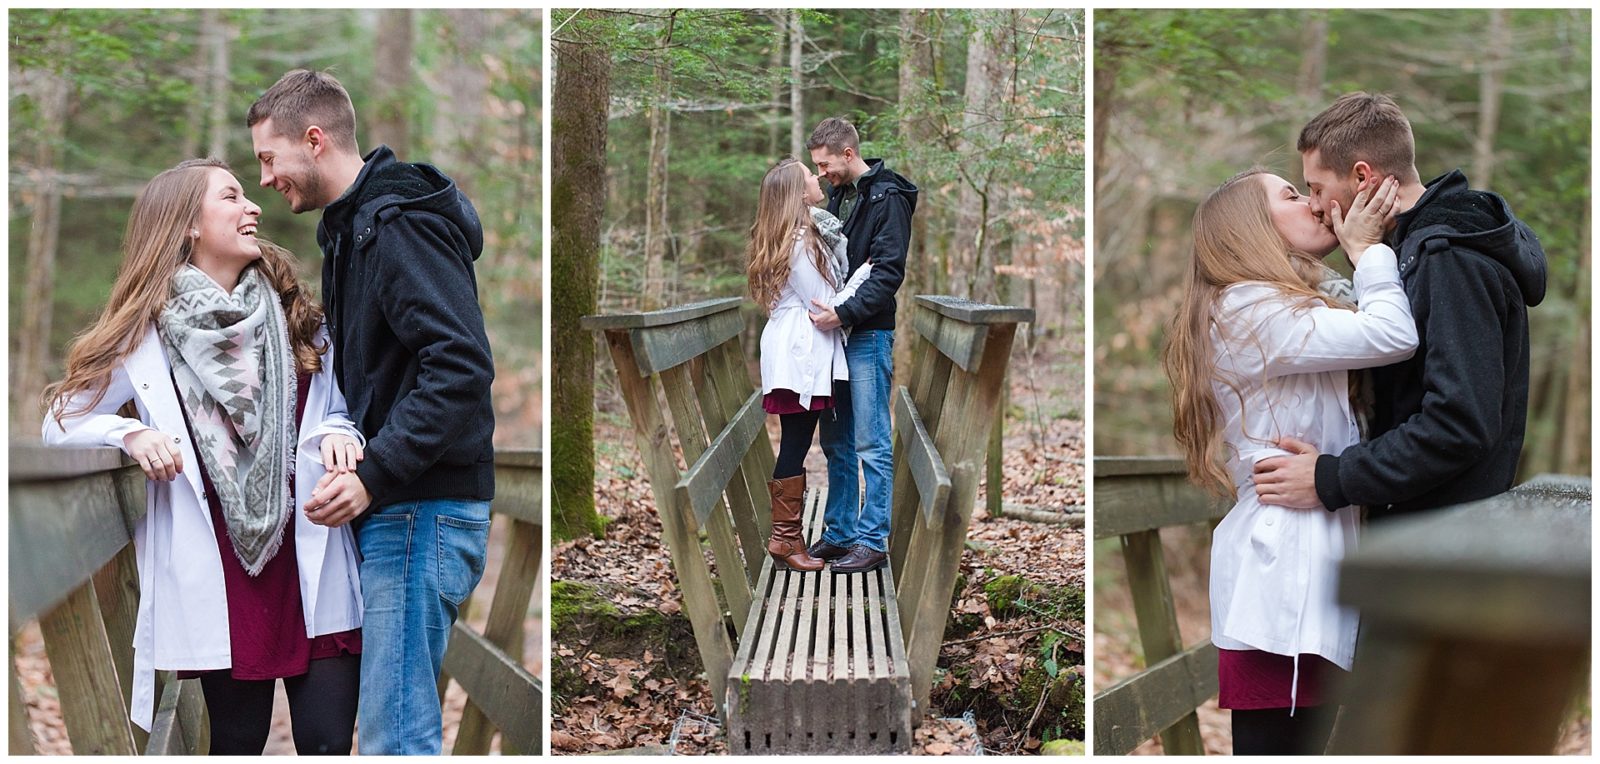 Winter Red River Gorge engagement session in Kentucky on the hiking trail to Left Flank.